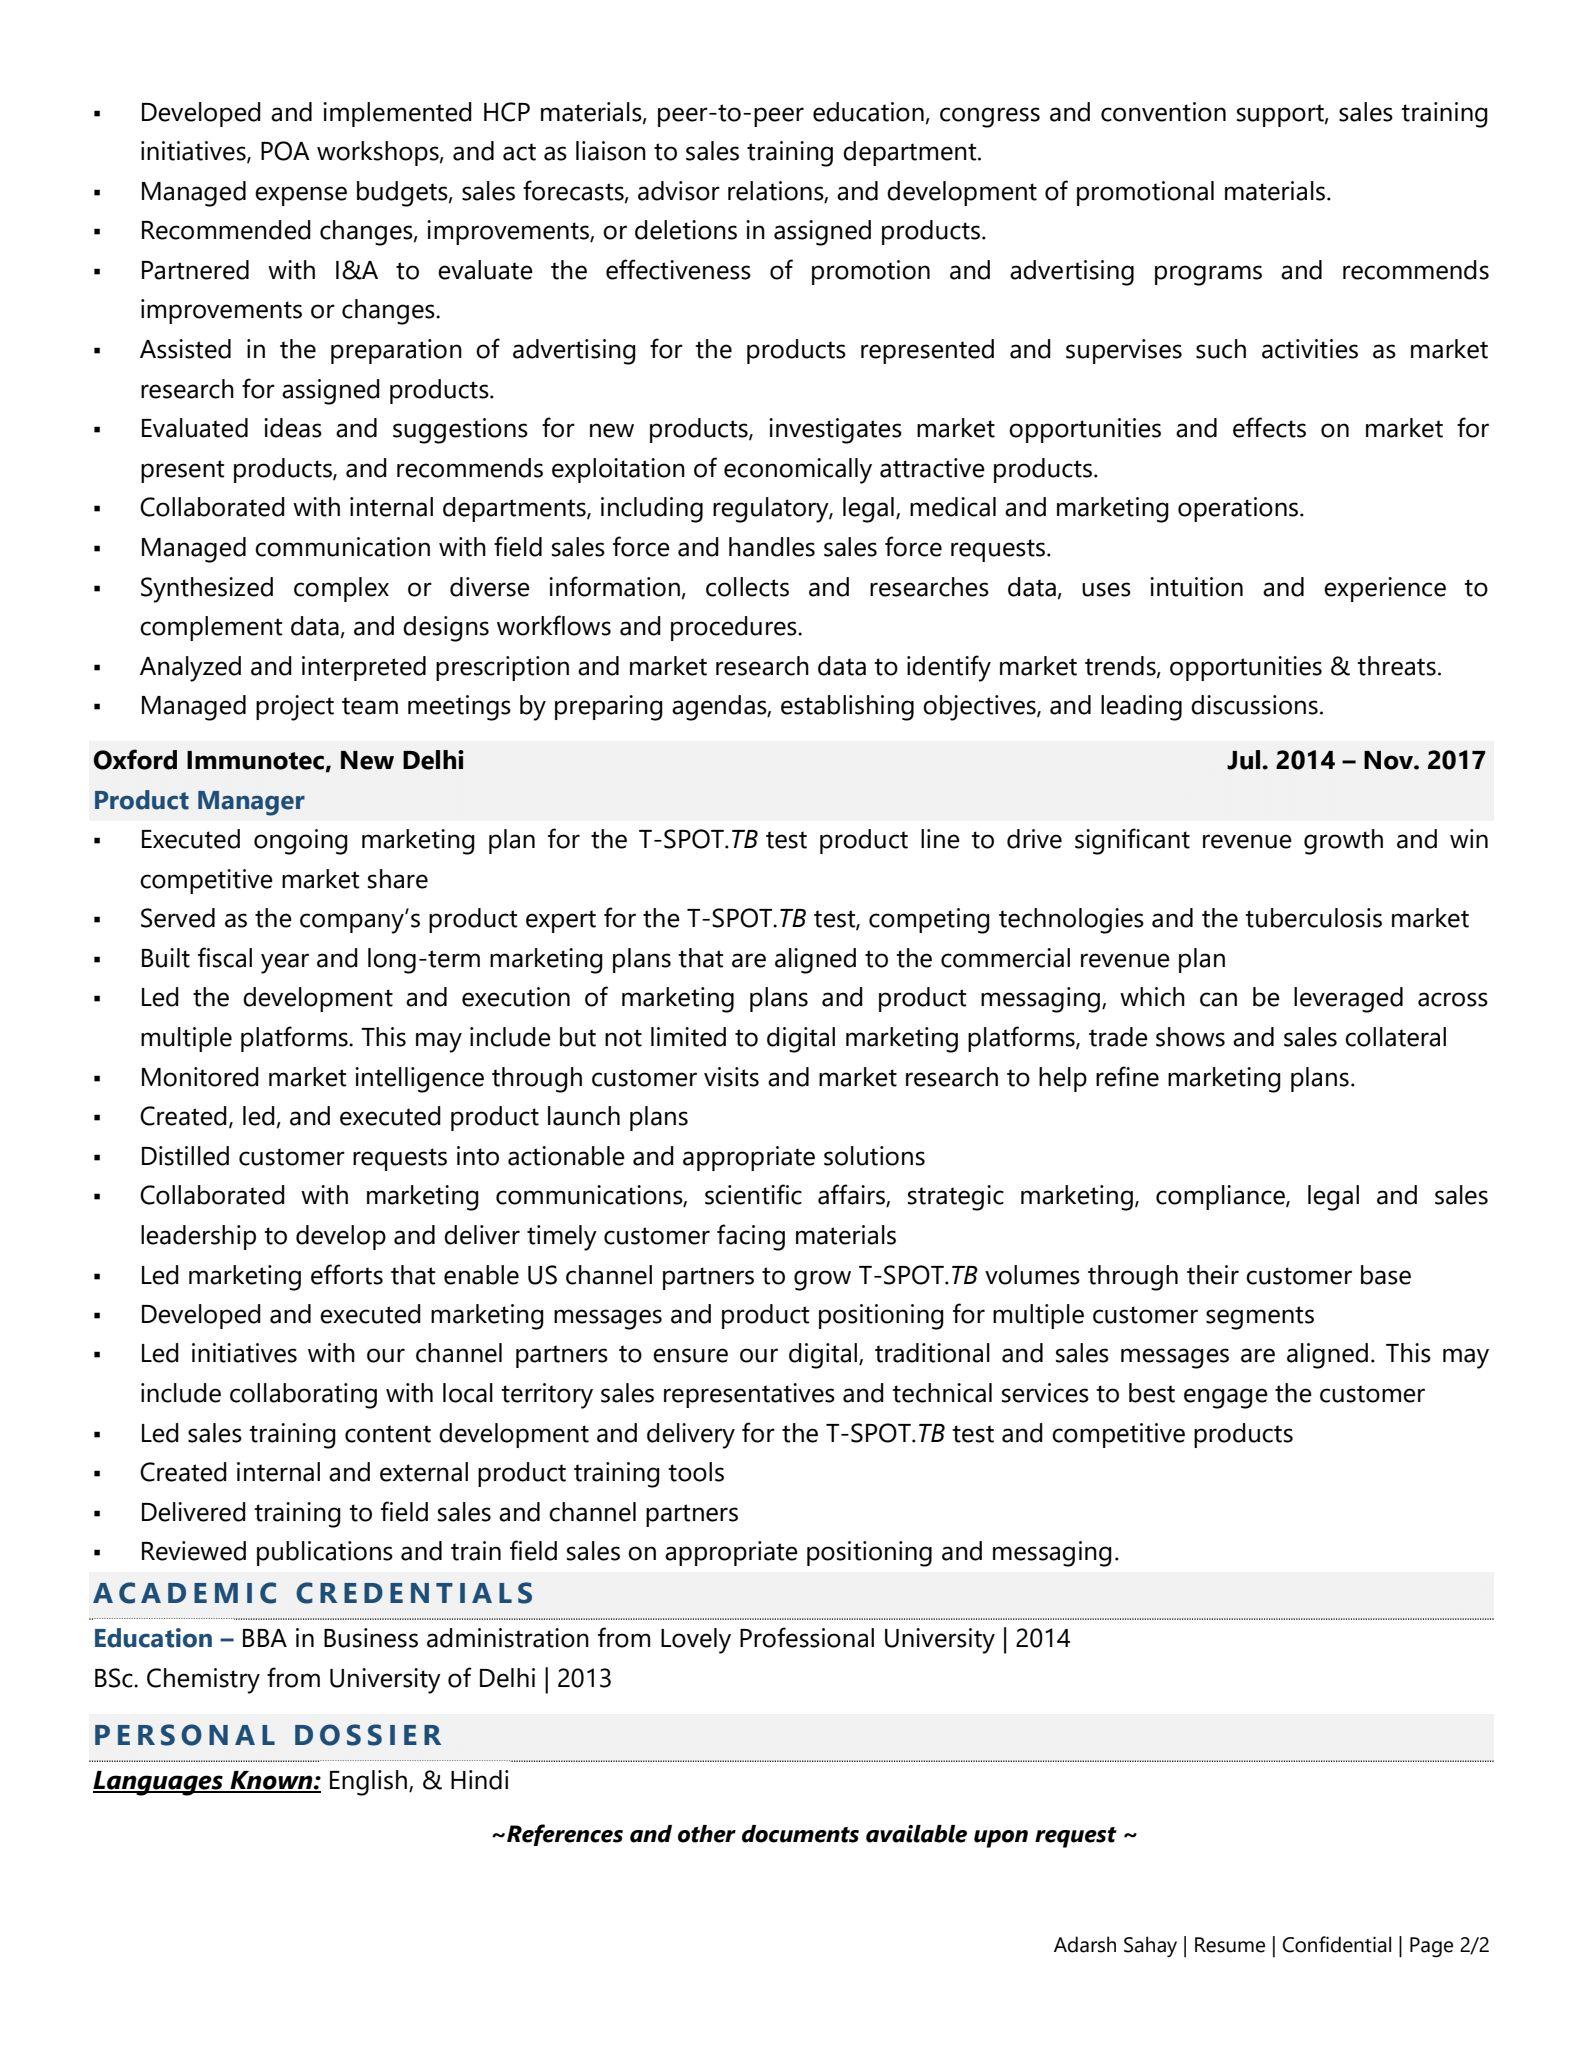 Pharma Product Manager - Resume Example & Template